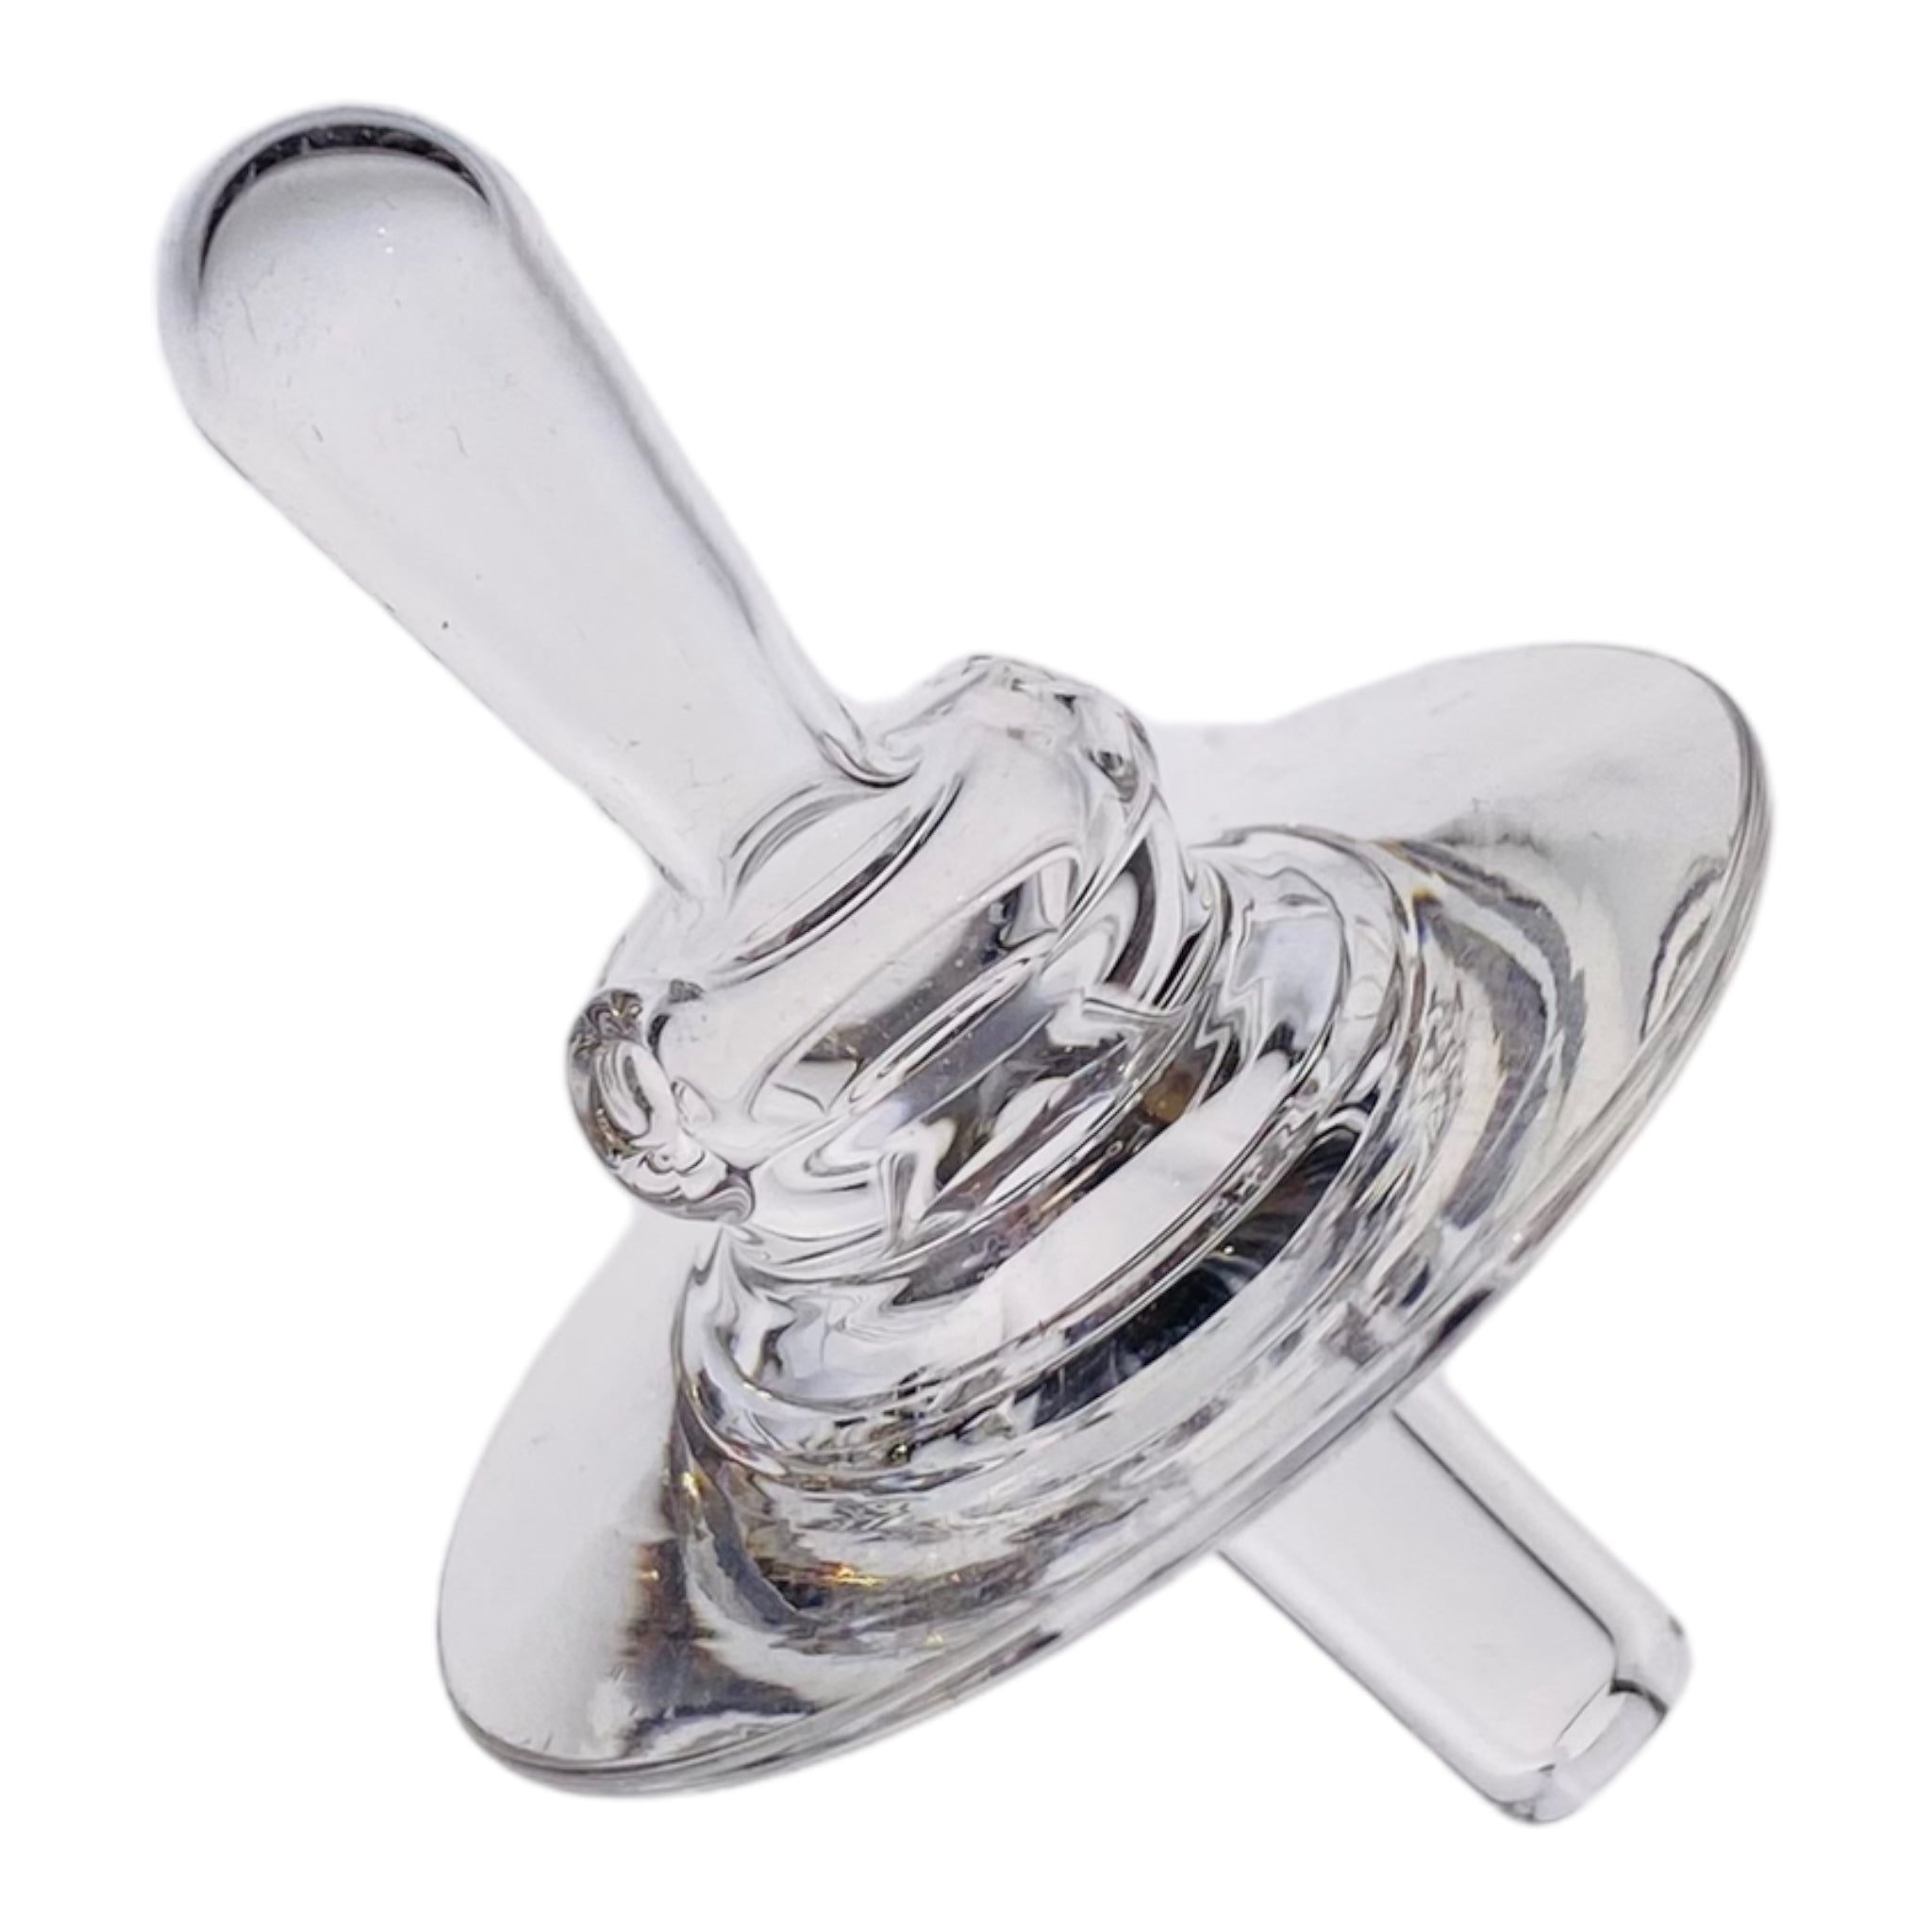 Zach Brown Glass - Clear Directional Airflow Carb Cap